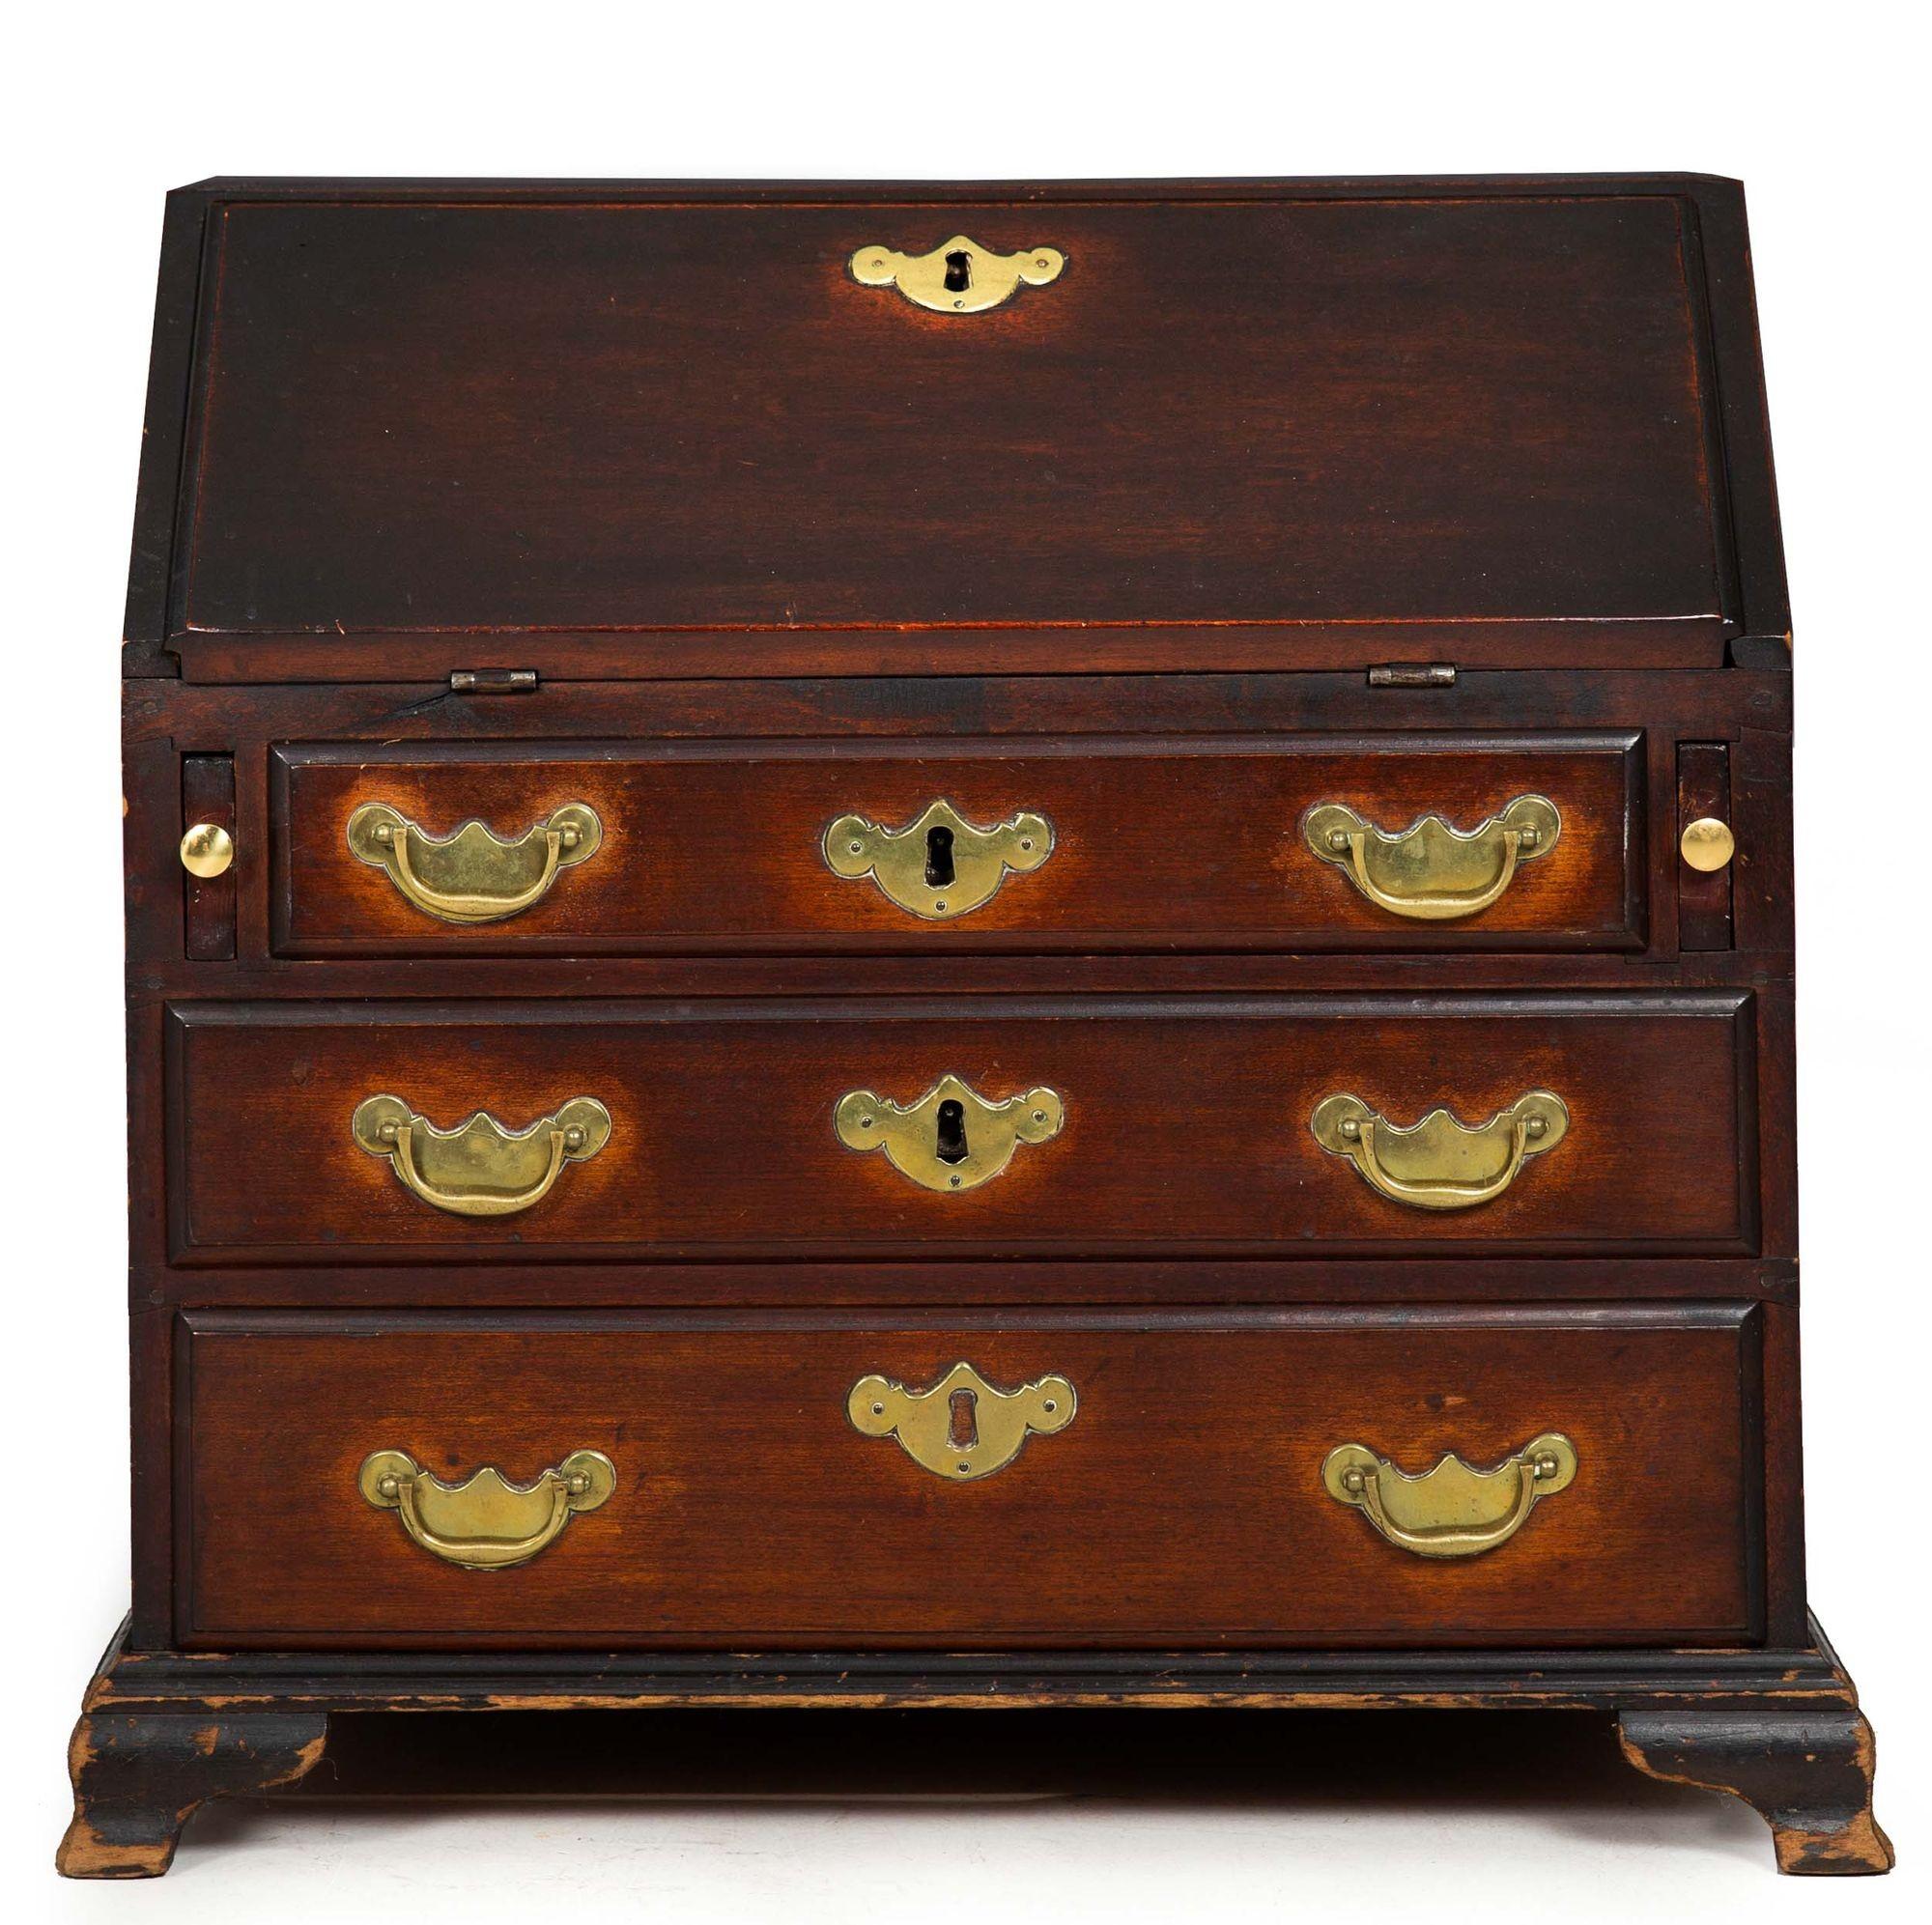 AMERICAN QUEEN ANNE MAHOGANIZED BIRCHWOOD CHILD'S SLANT-FRONT DESK
New England States, circa 1760  with mostly original hardware and an early surface
Item # 310HOT05Z
A rare and quite compelling bureau-top writing chest or also designed as a child's